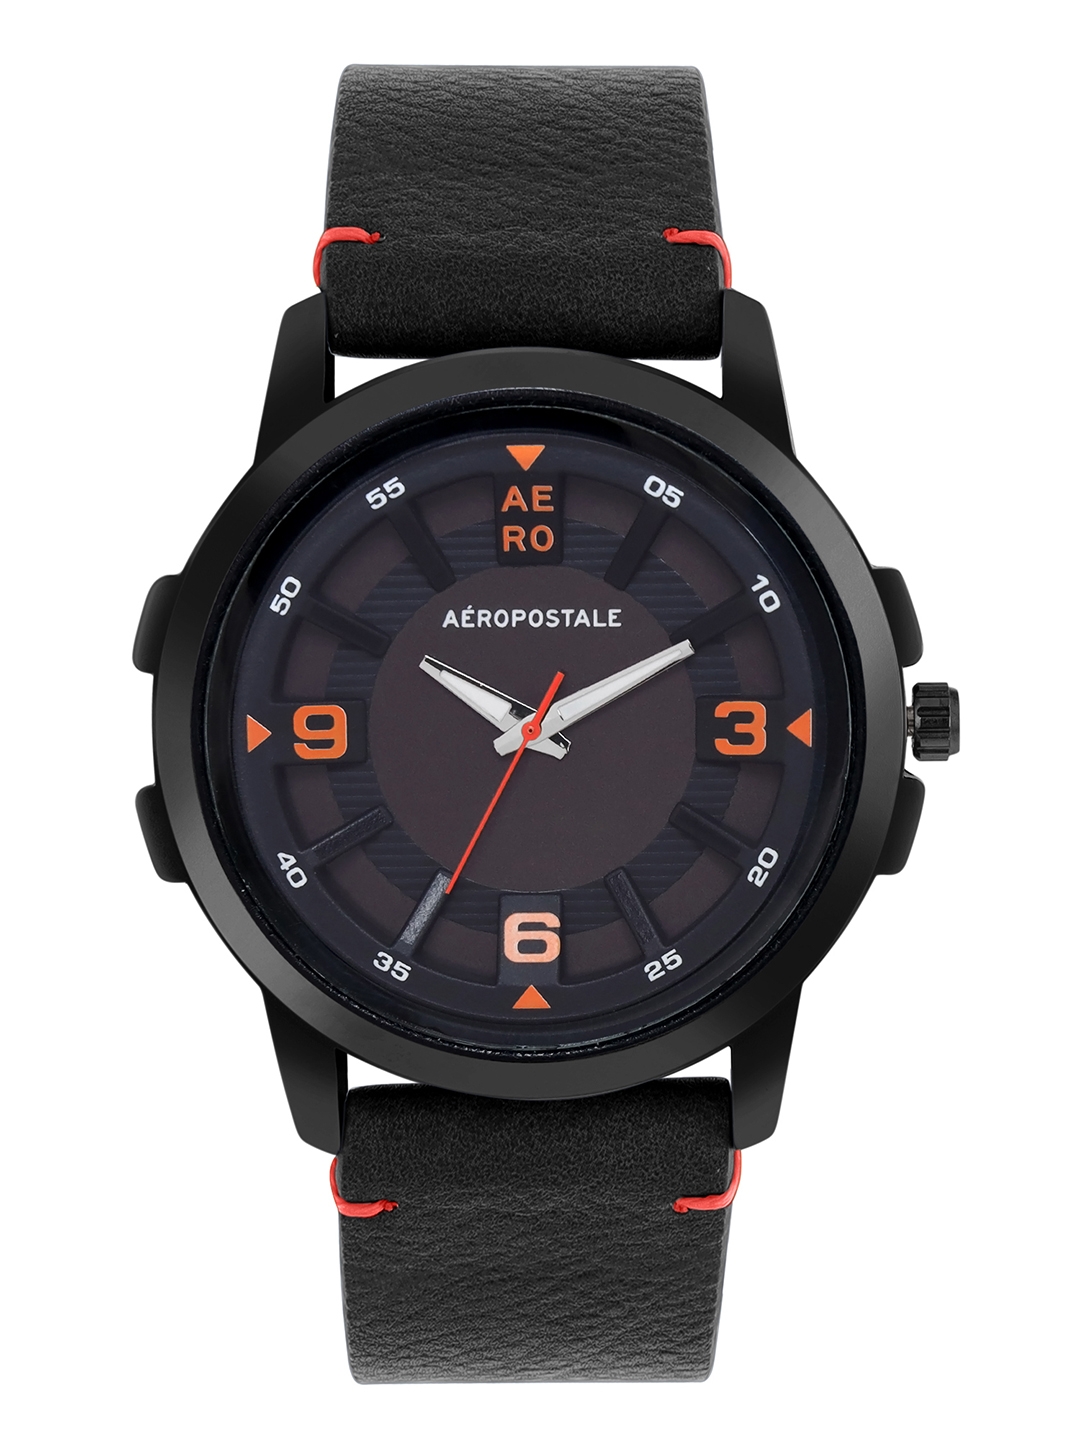 Aeropostale "AERO_AW_A6-2_BLK" Classic Men’s Analog Quartz Wrist Watch, Black Metal Alloy case, Classic Black Dial with contrasting Red white hand, Leather  wrist Band  Water resistant 3.0 ATM.